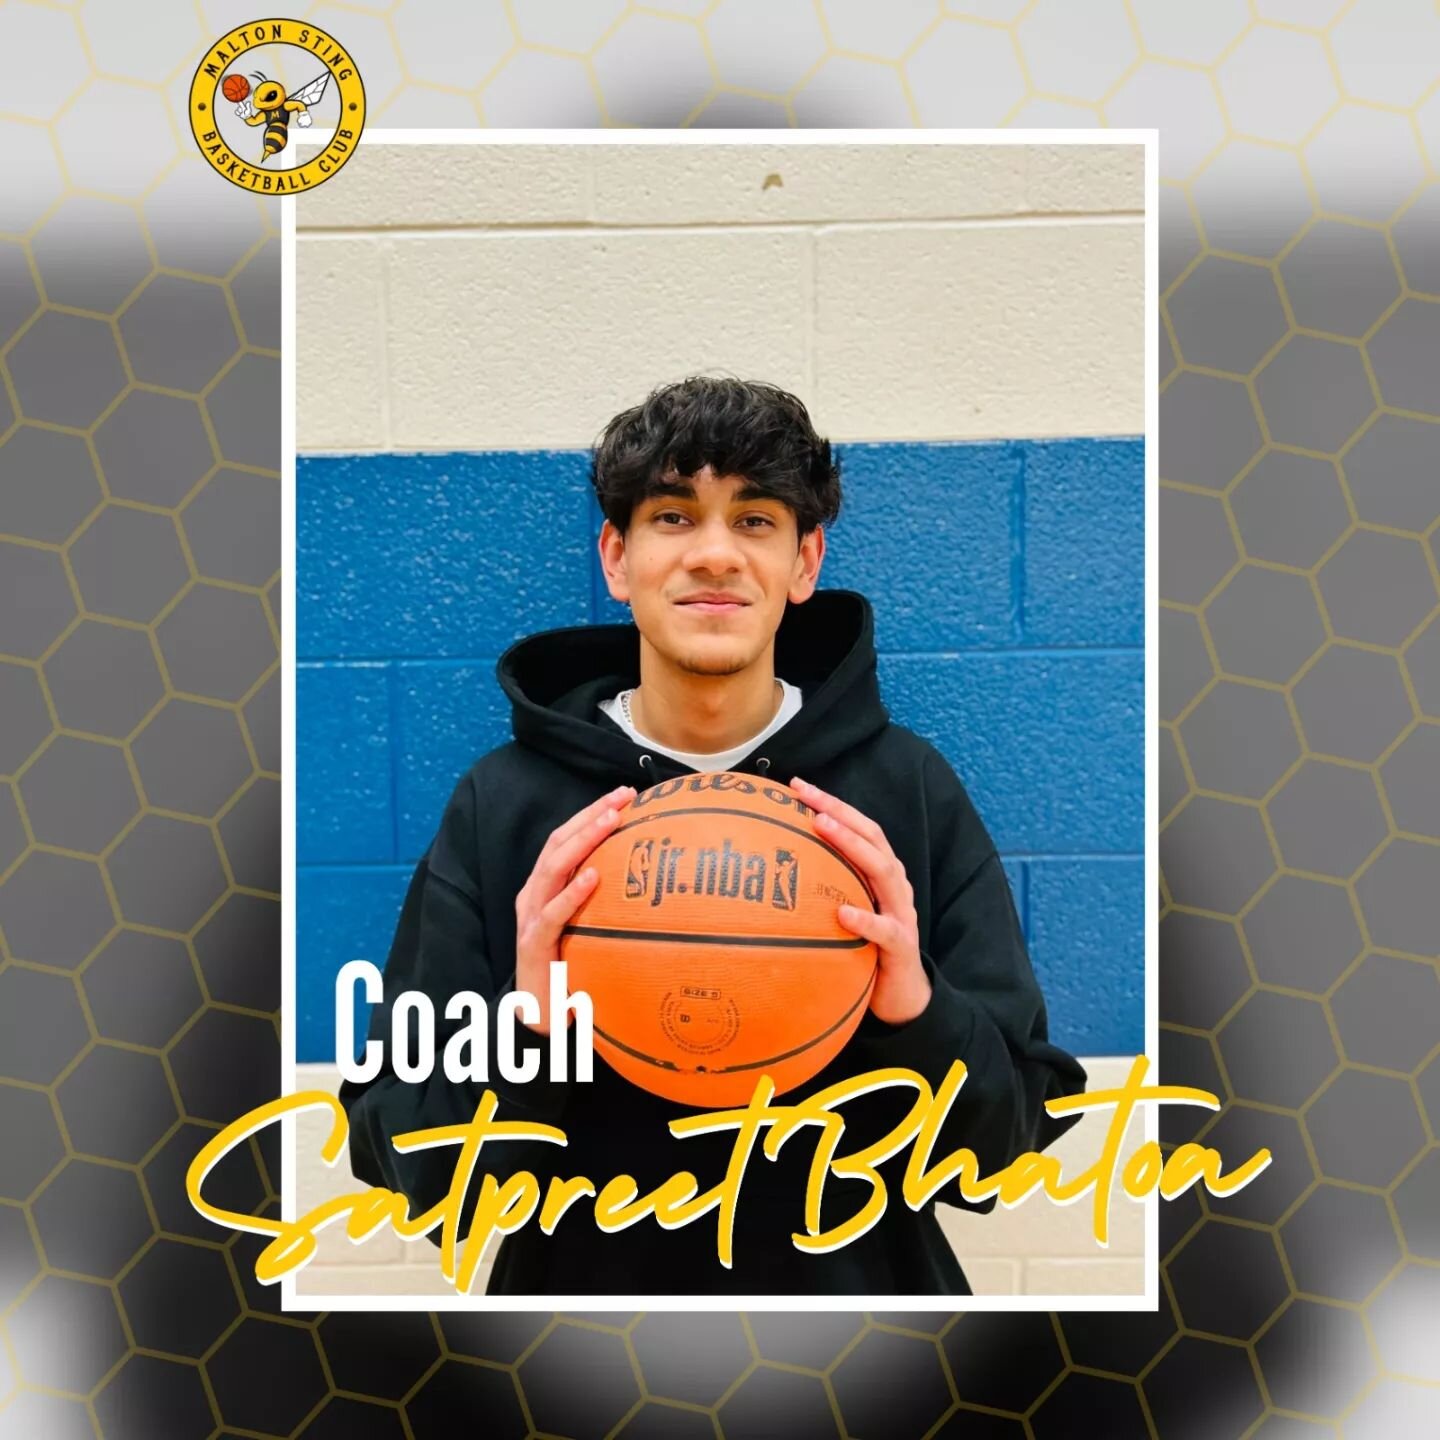 SEASON FIVE - COACH 

🐝Coach Satpreet started coaching with Malton Sting this year in October, and loves the time he spends working with everybody.🐝

📝Coach Satpreet is a youth apprentice coach, and is currently in his final year of high school. H